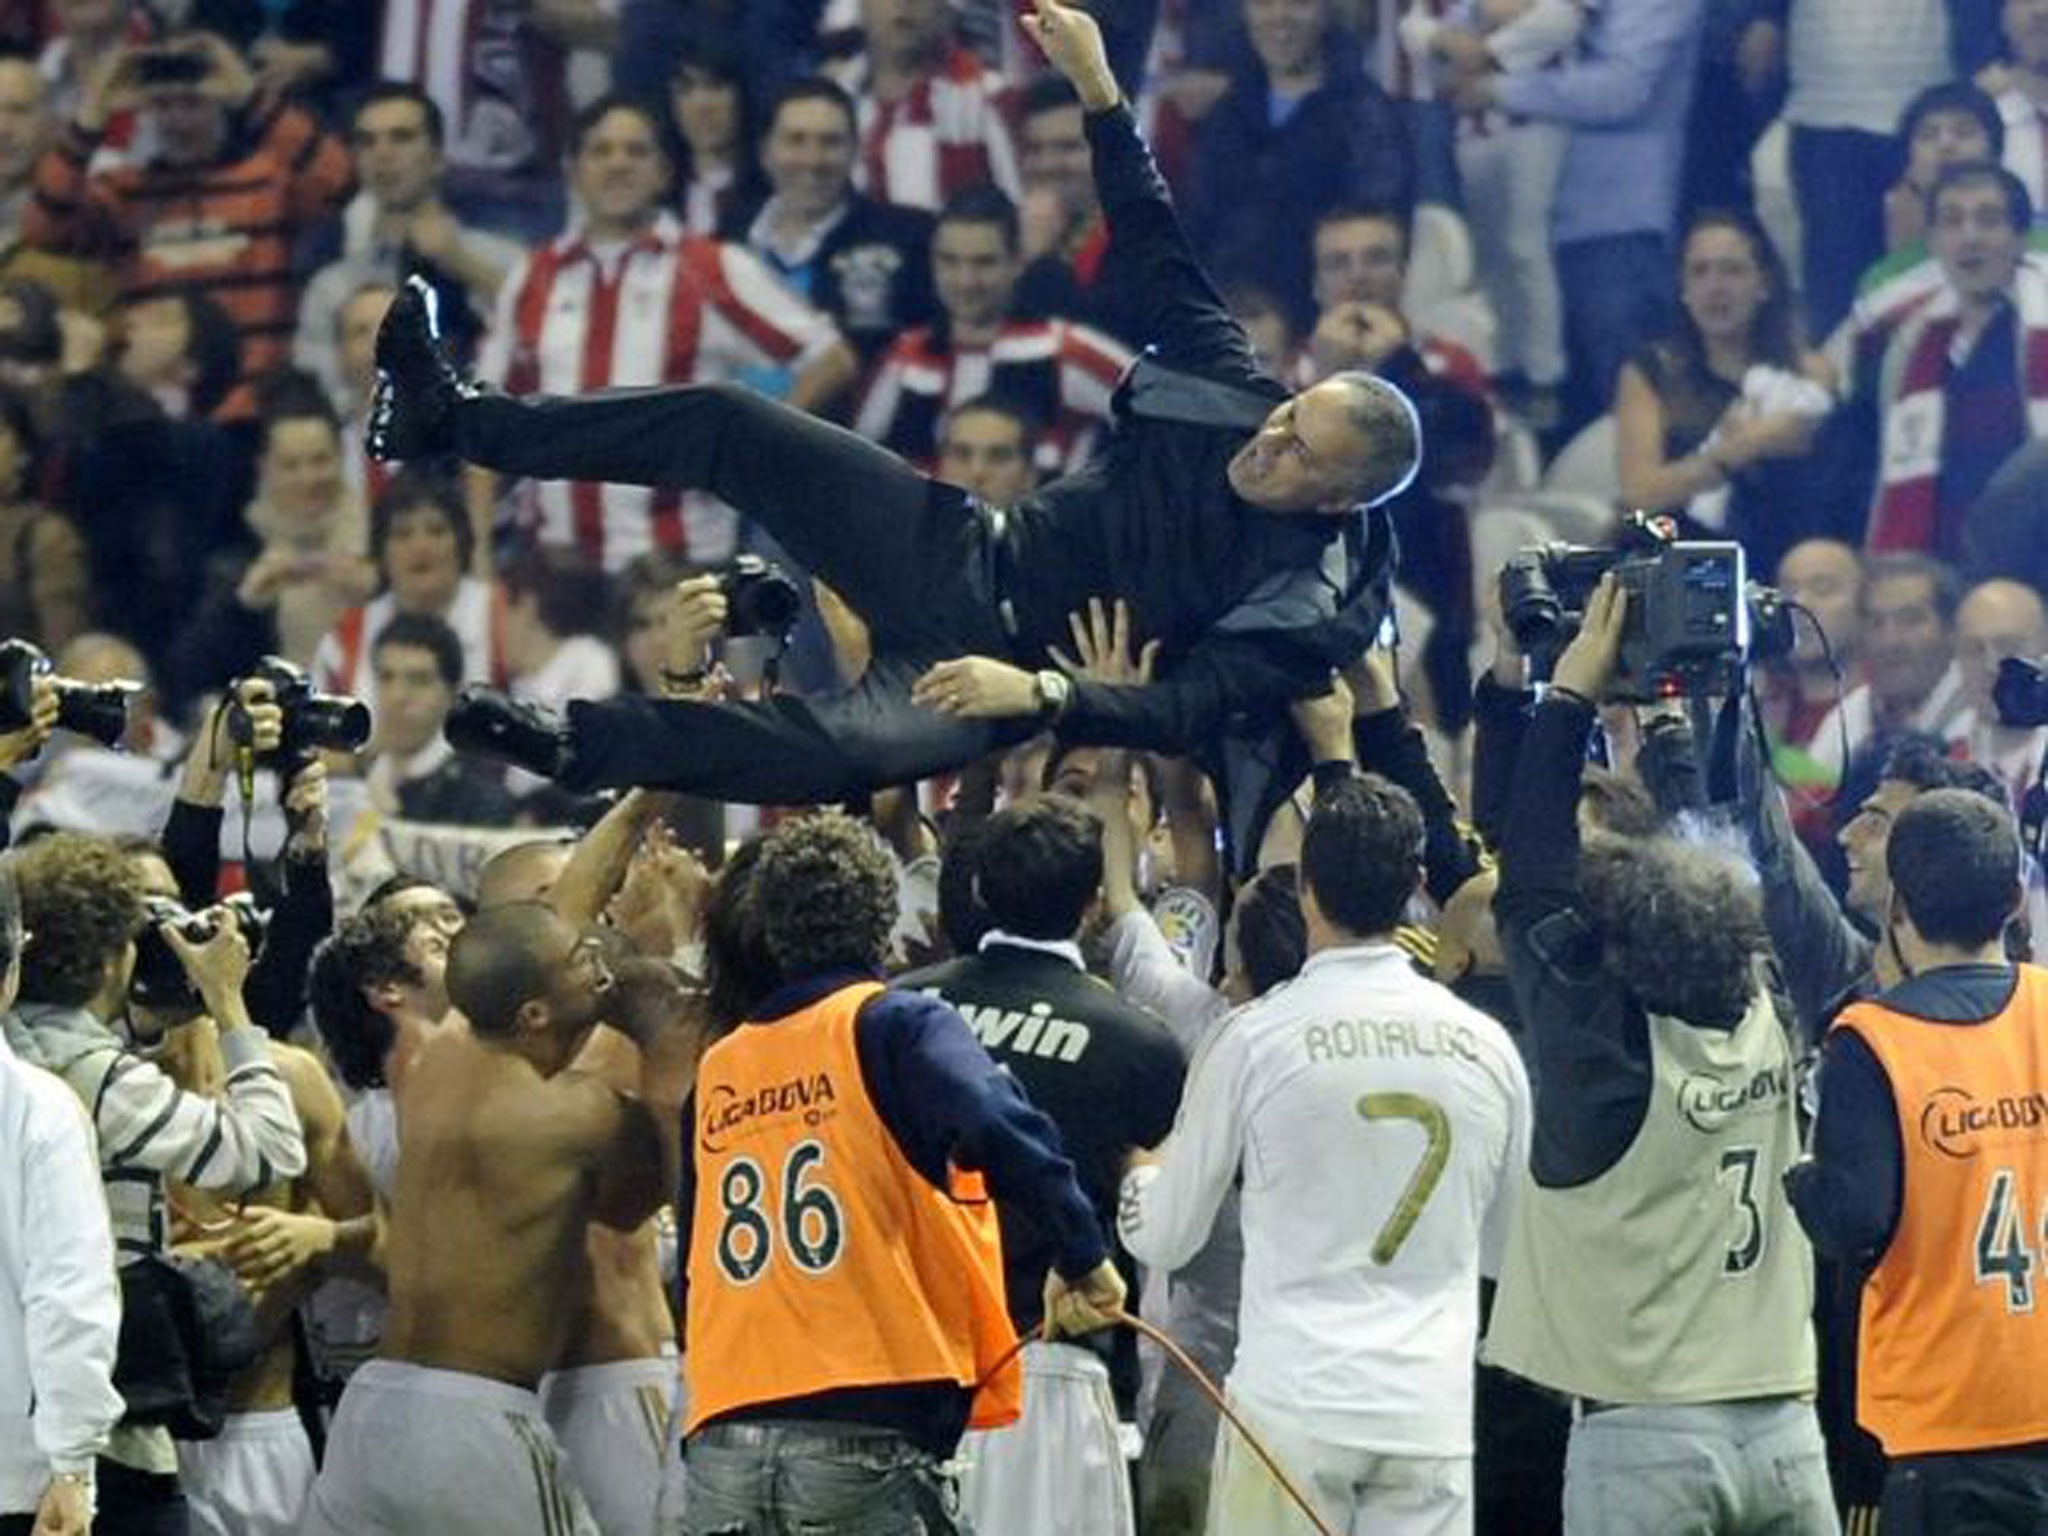 Happier days at Madrid as Jose Mourinho is hoisted aloft by his Real players